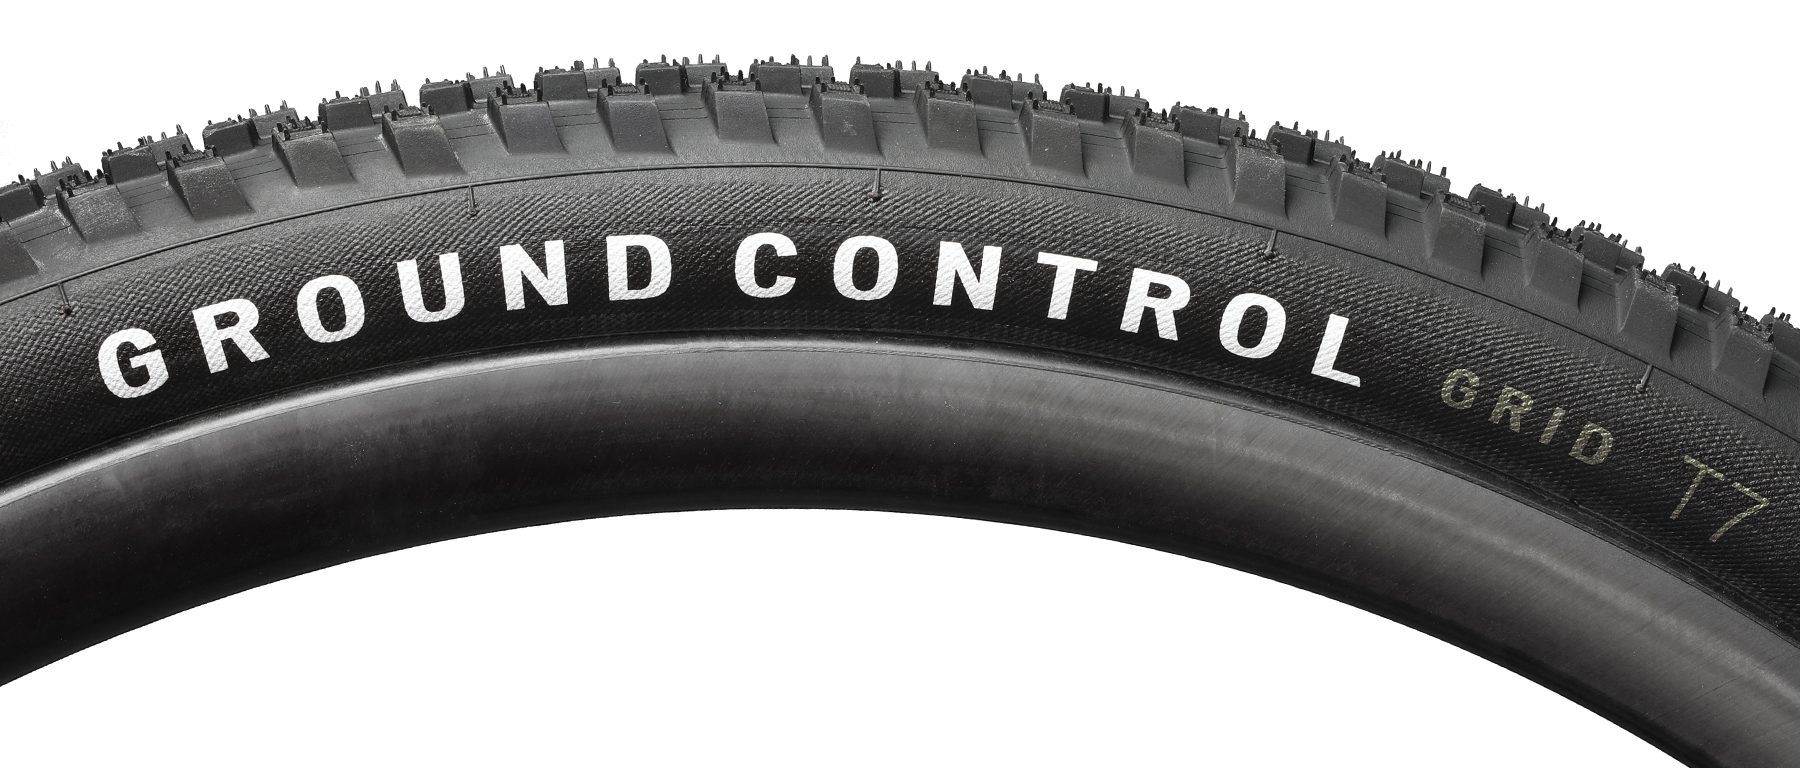 Specialized Ground Control GRID 2Bliss T7 Tire